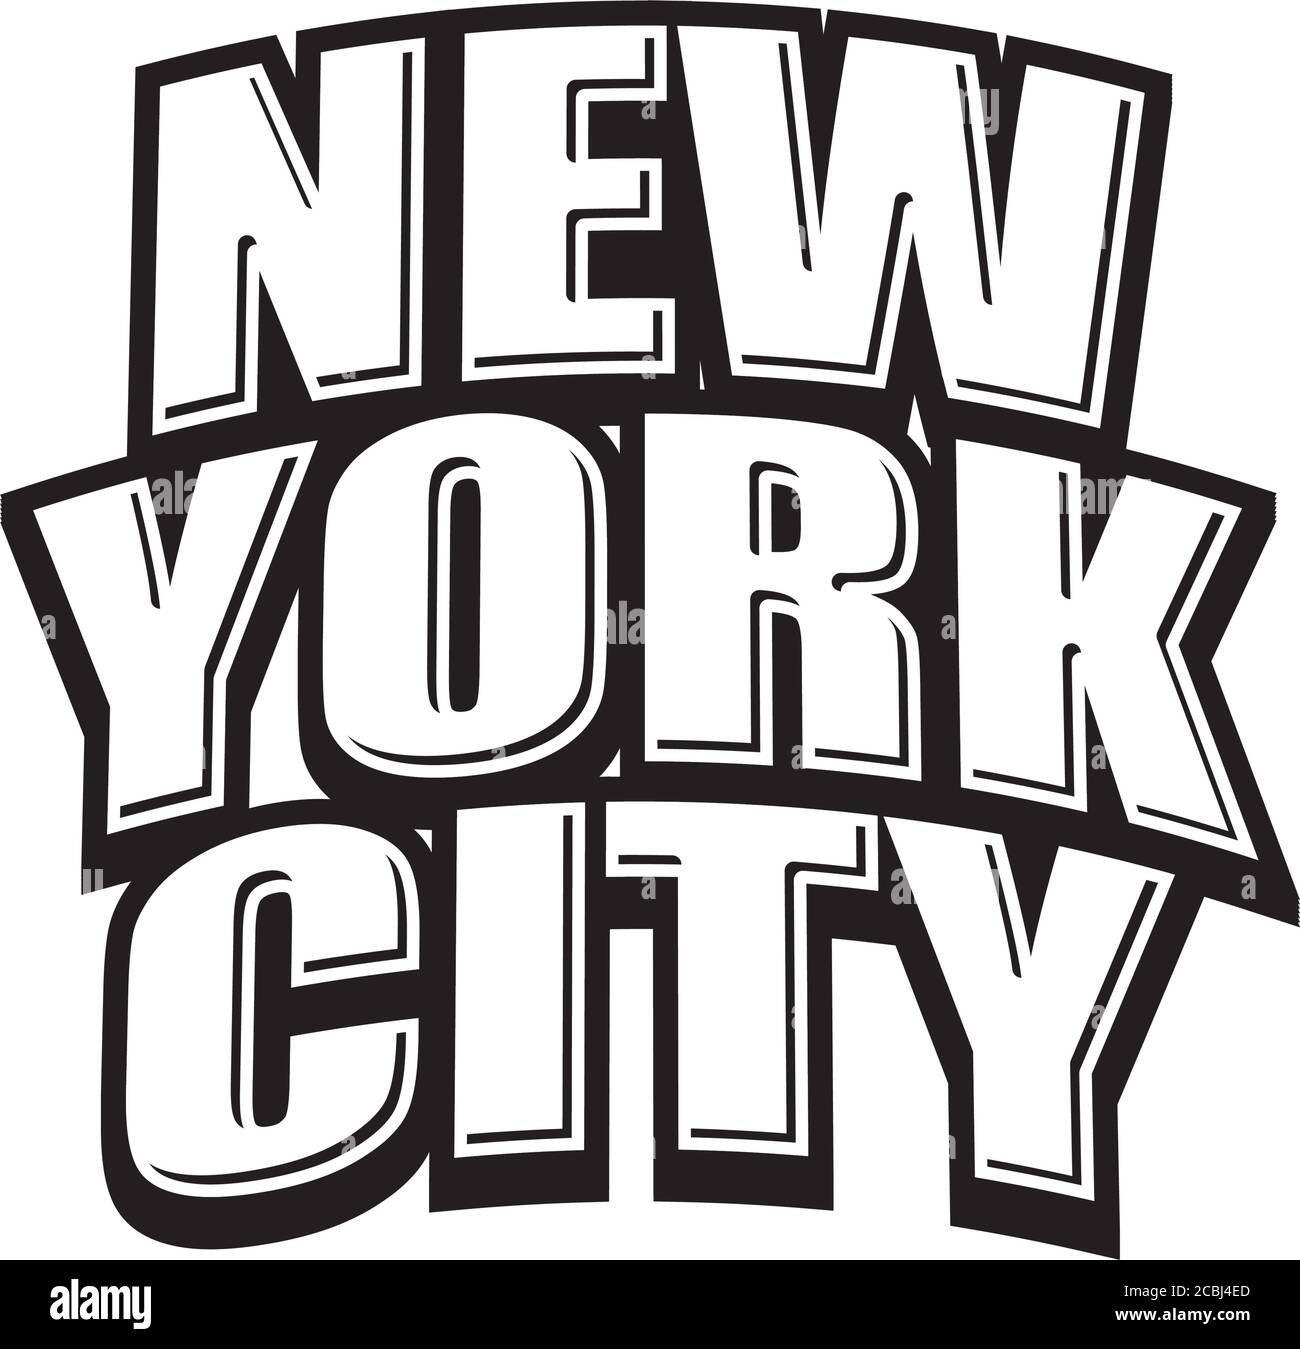 New York City lettering compostition. Black and white hand drawn illustration. Icon sign for print and labelling. Stock Vector